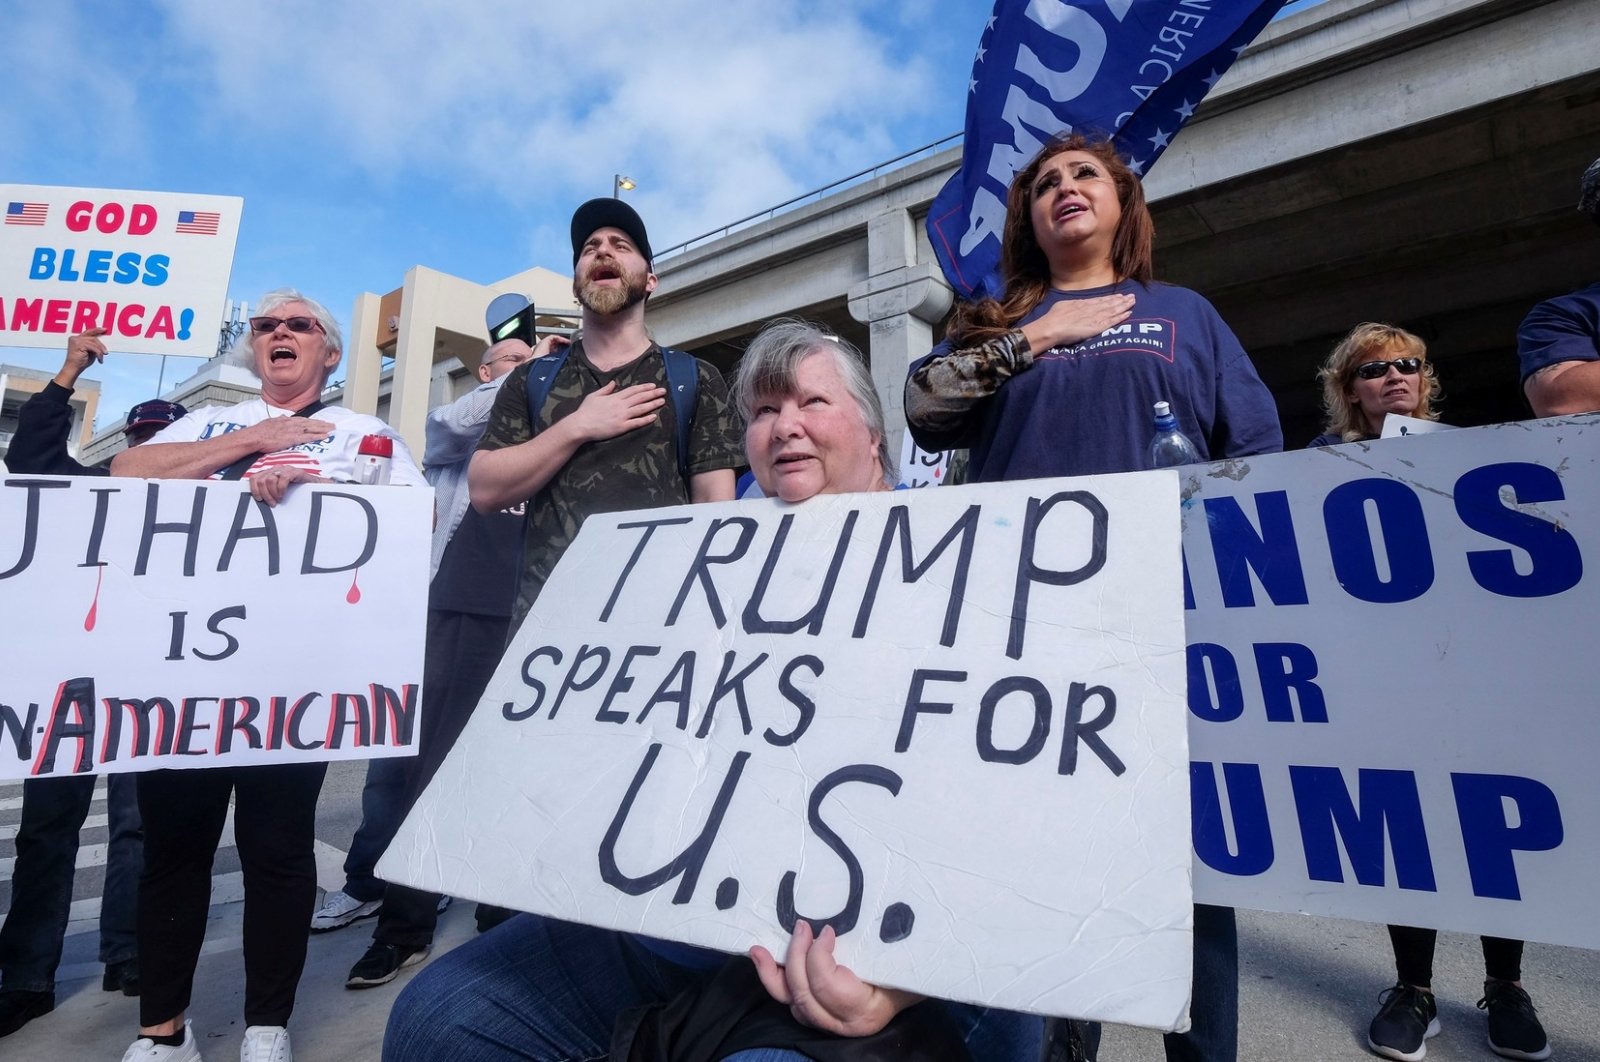 A group of Former U.S. President Donald Trump supporters display Islamophobic messages at a gathering (Reuters File Photo)